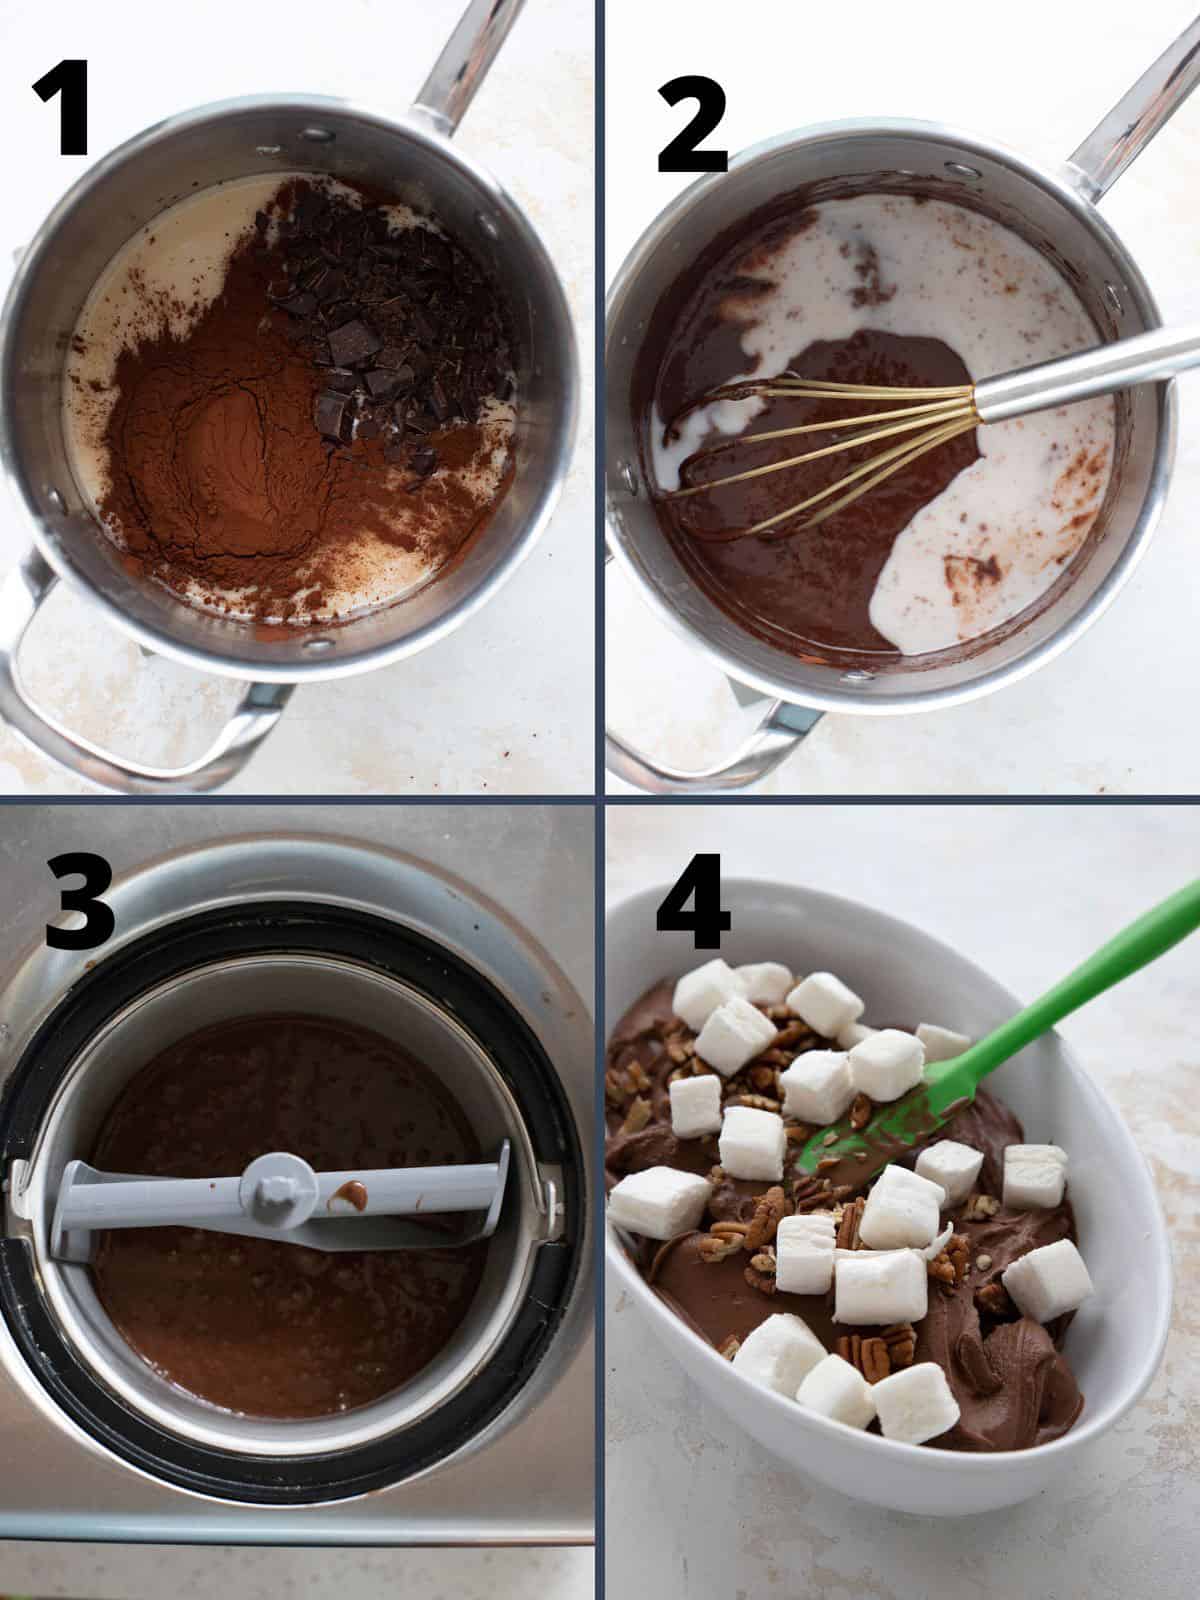 A collage of 4 images showing how to make keto rocky road ice cream.